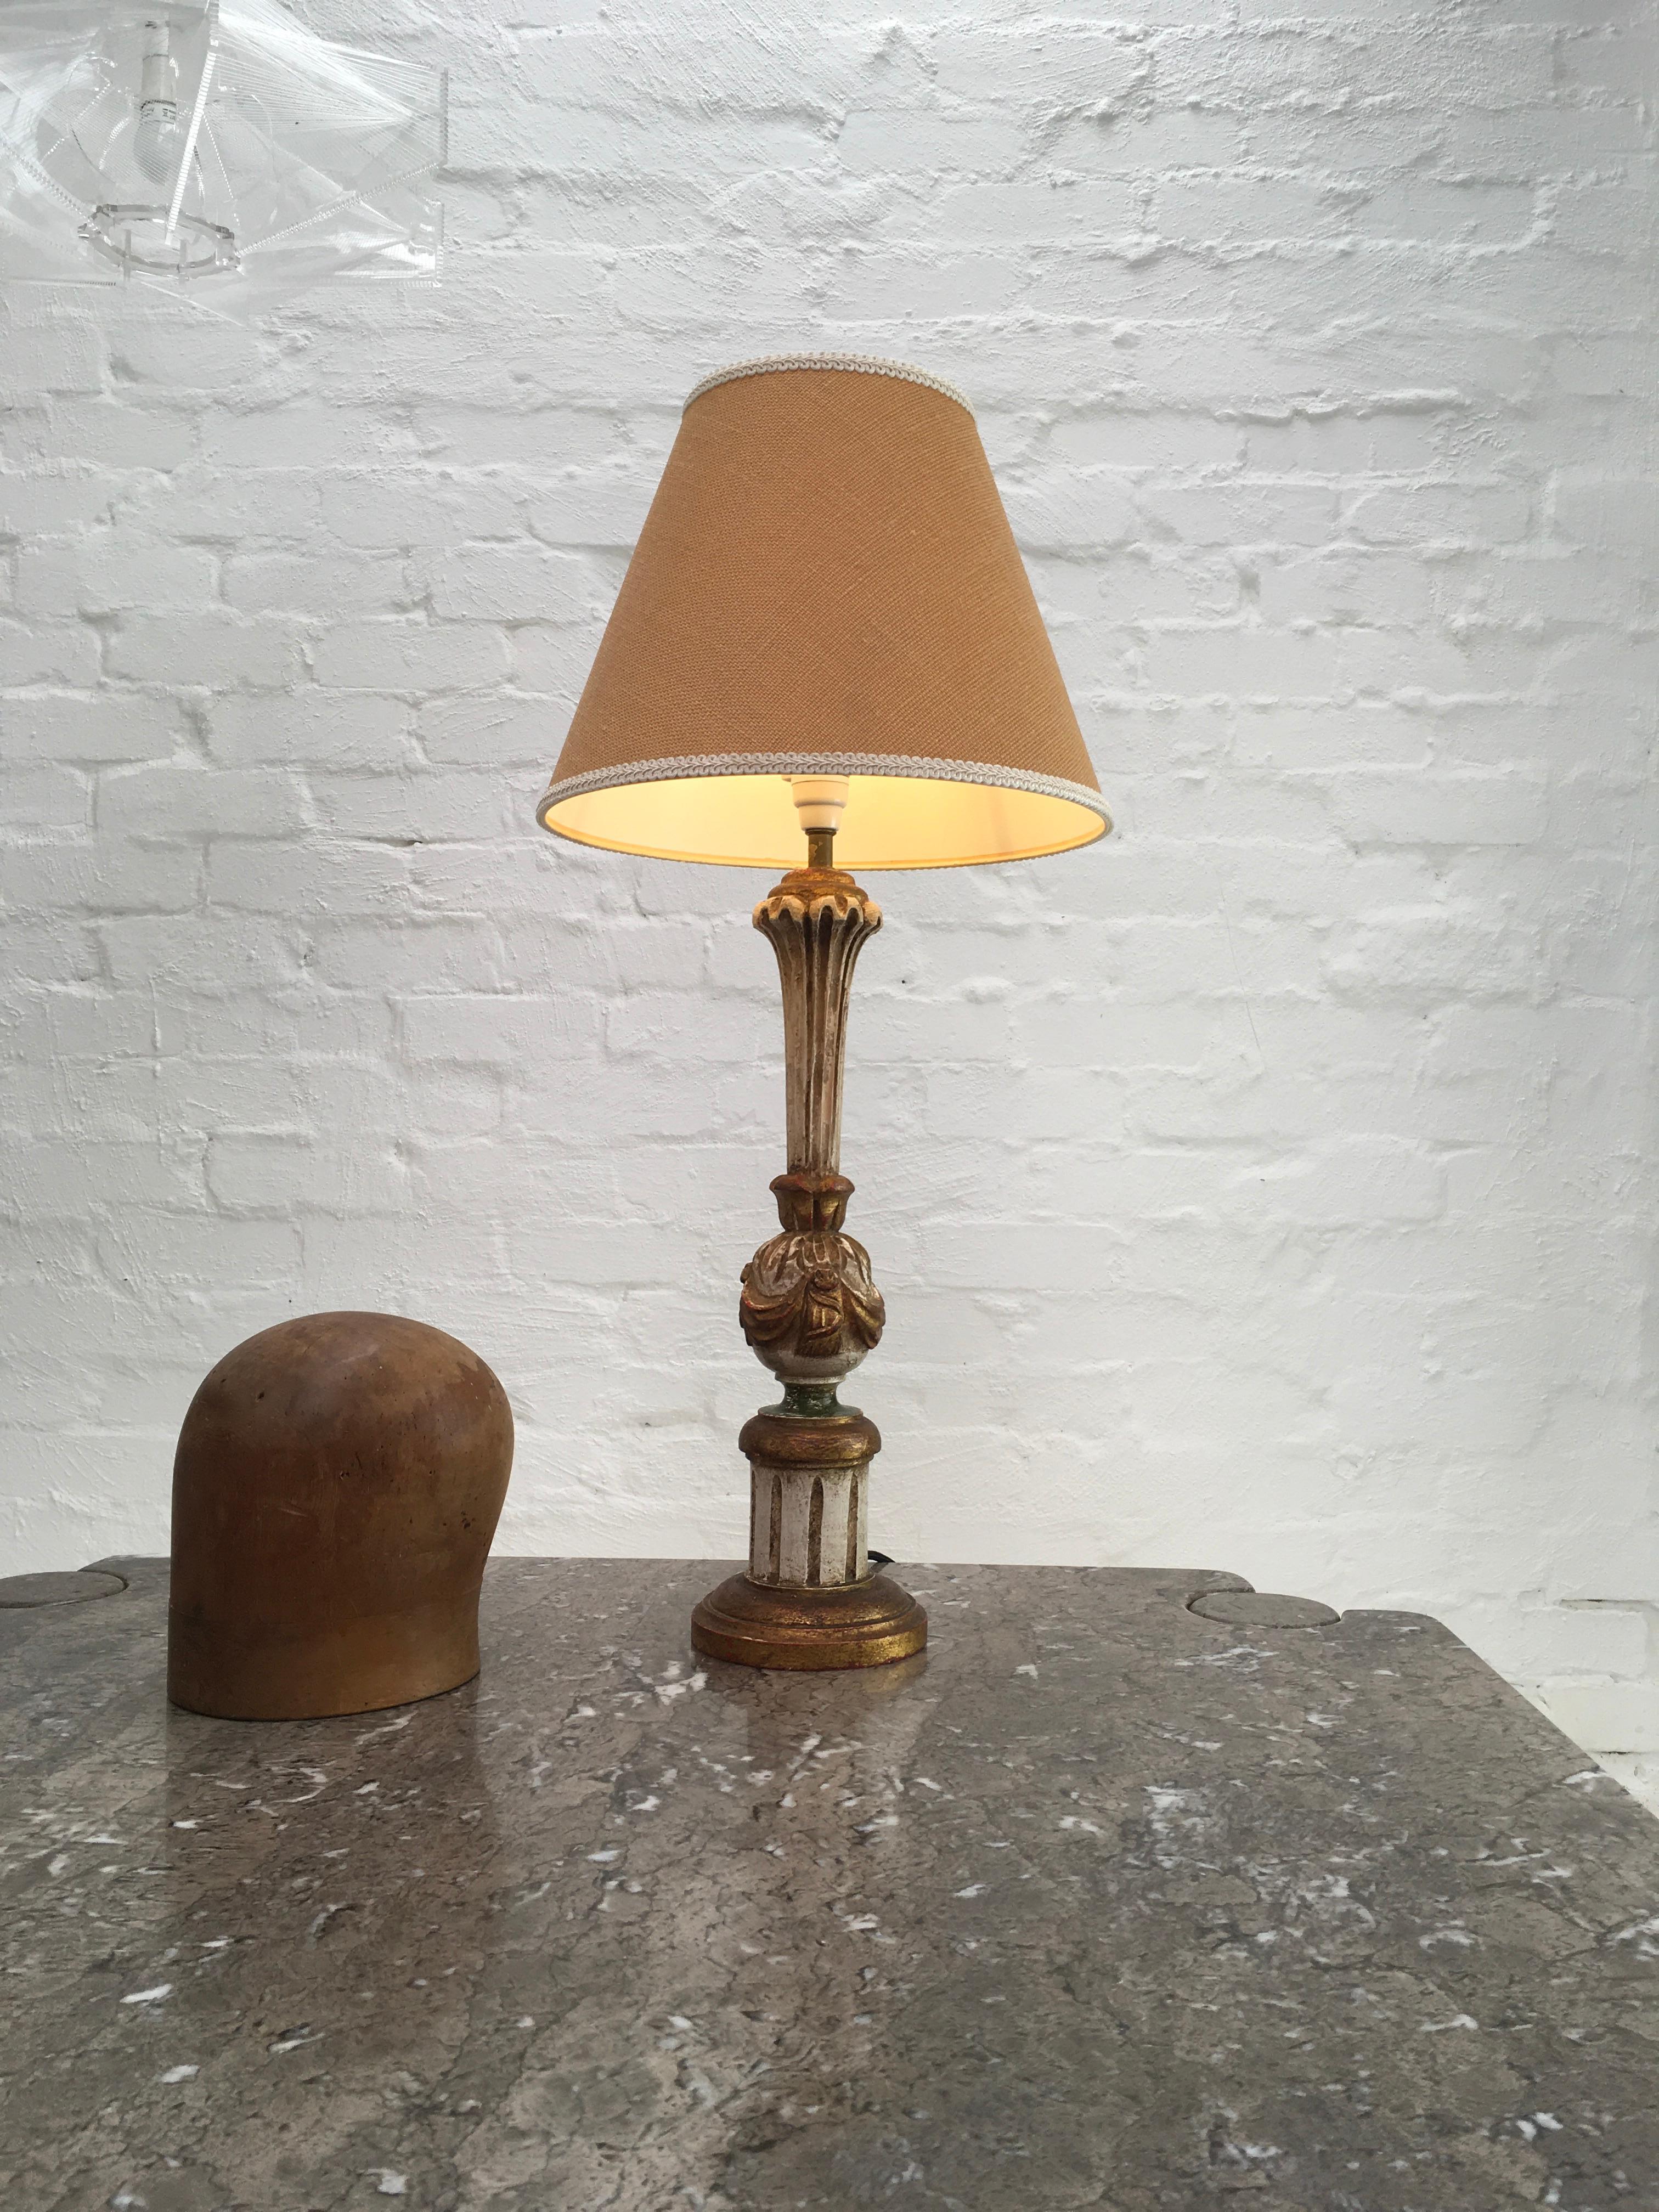 Hand-Carved Mid-20th Century Florentine Giltwood Lamp with Original Shade Regency Style For Sale